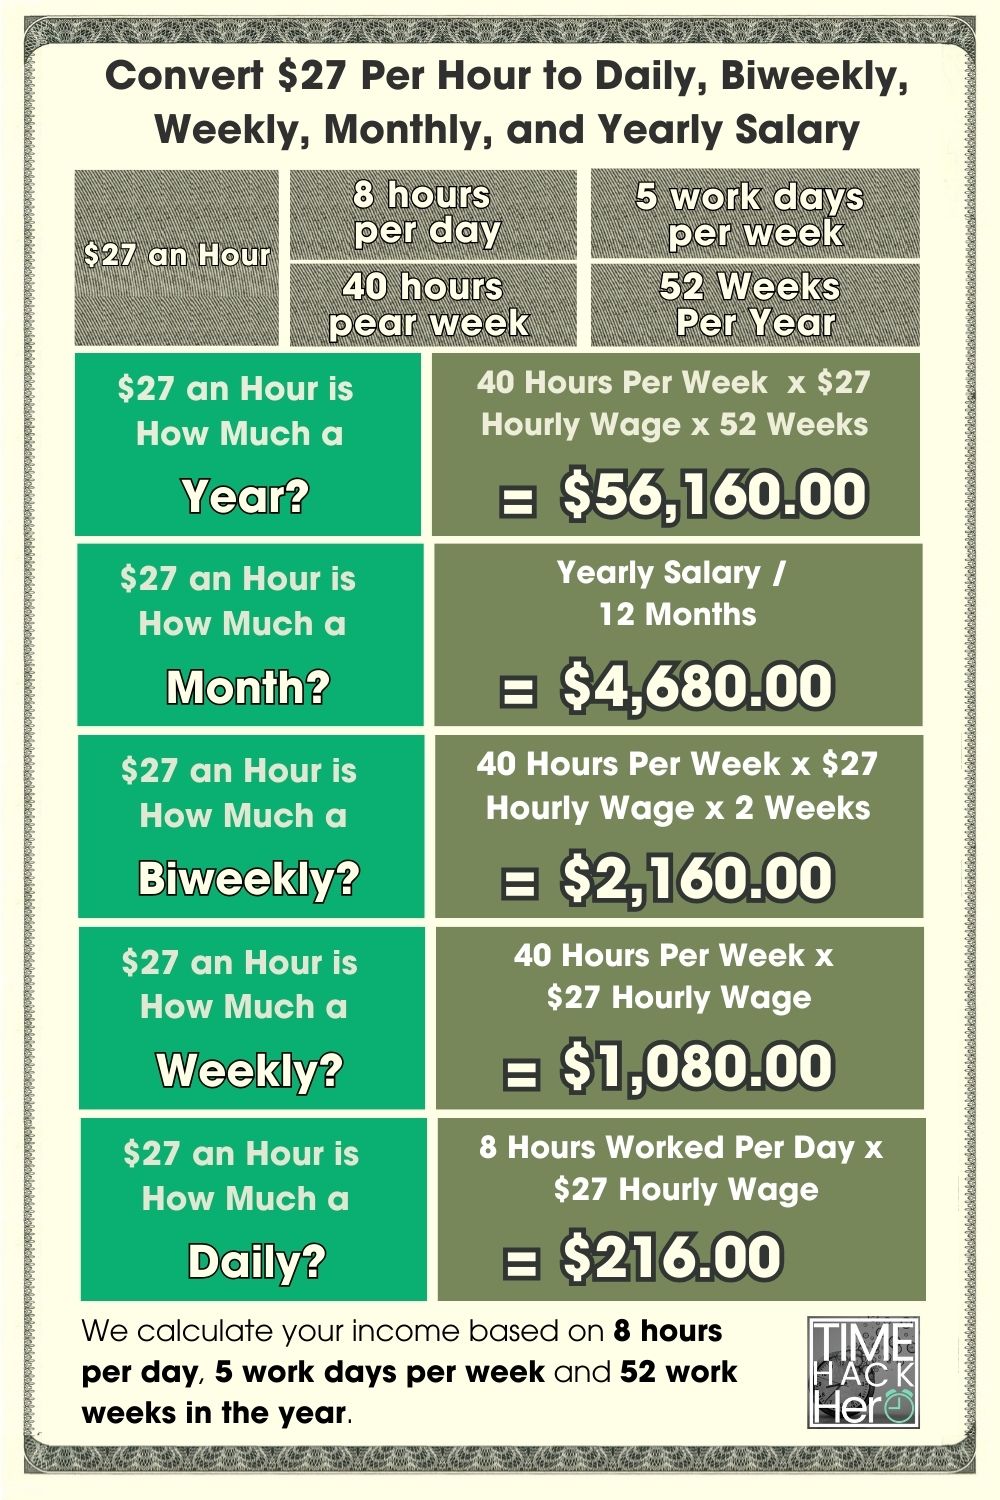 Convert $27 Per Hour to Daily, Biweekly, Weekly, Monthly, and Yearly Salary